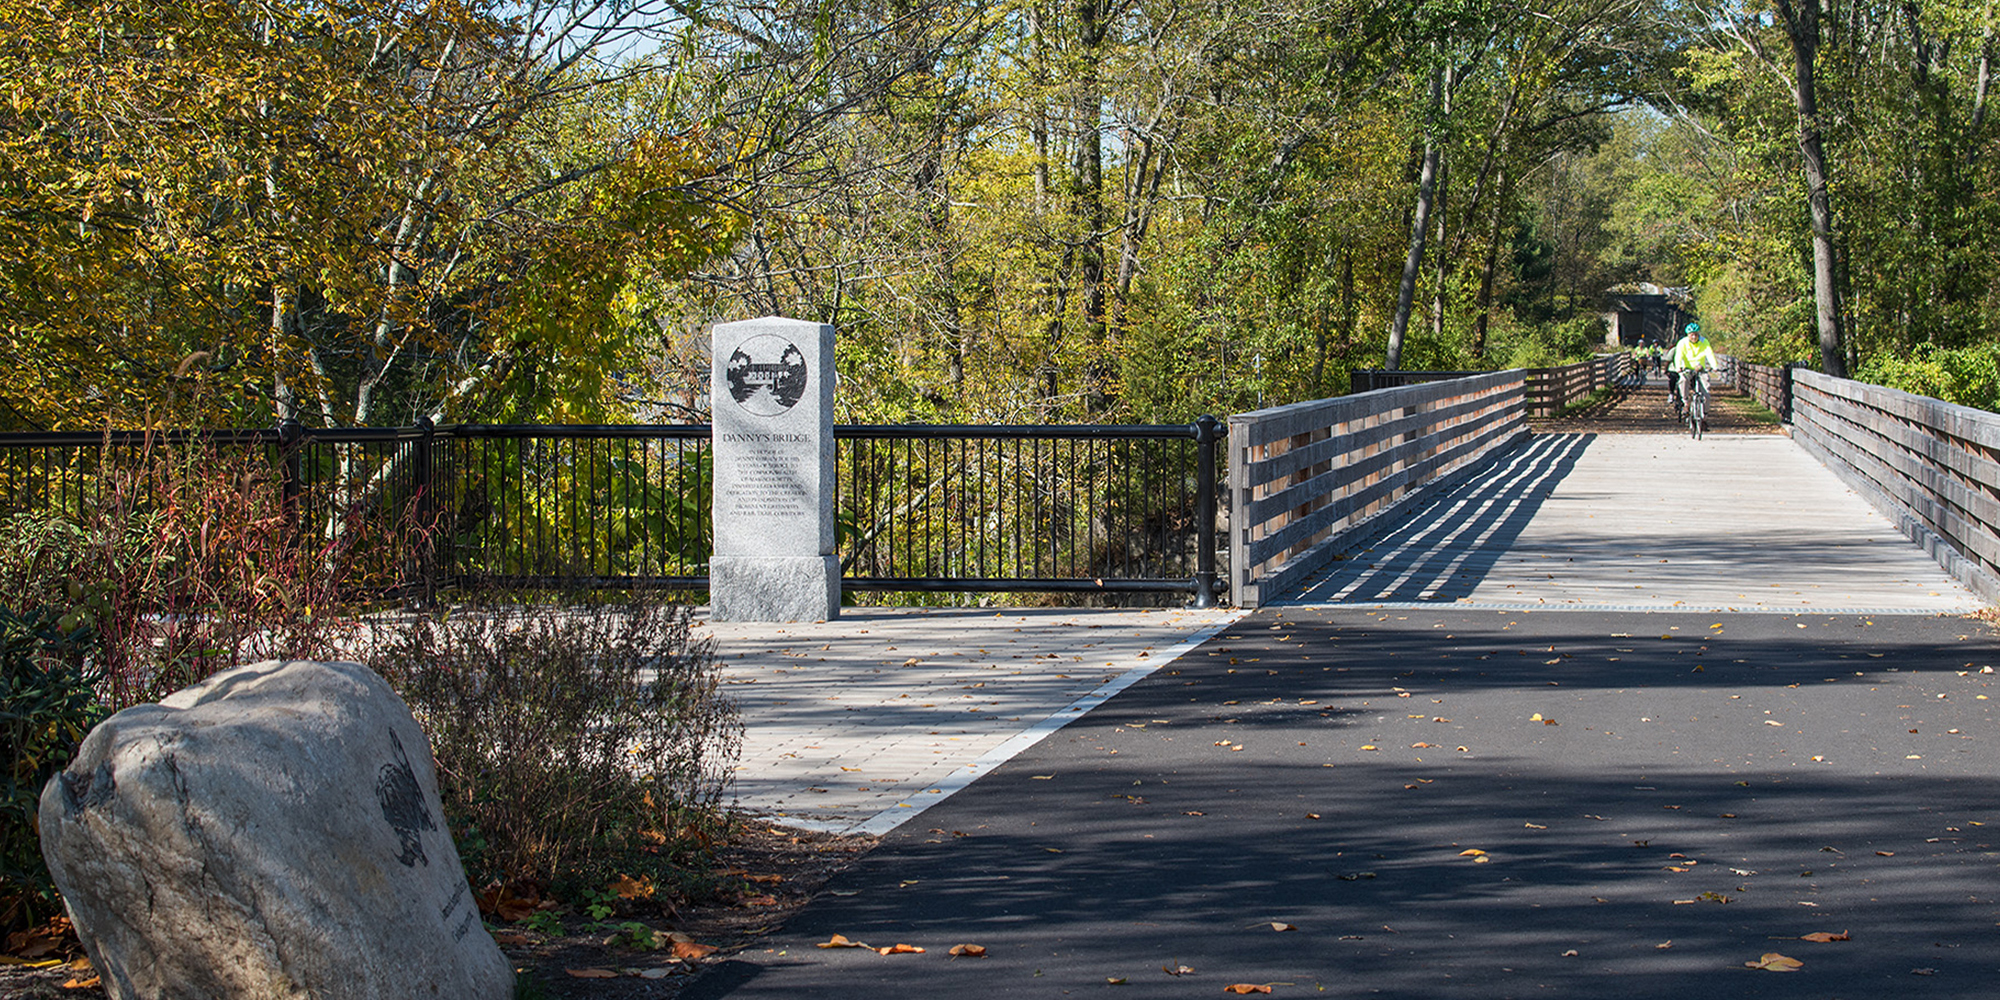 Cyclists along the Blackstone River Valley Greenway